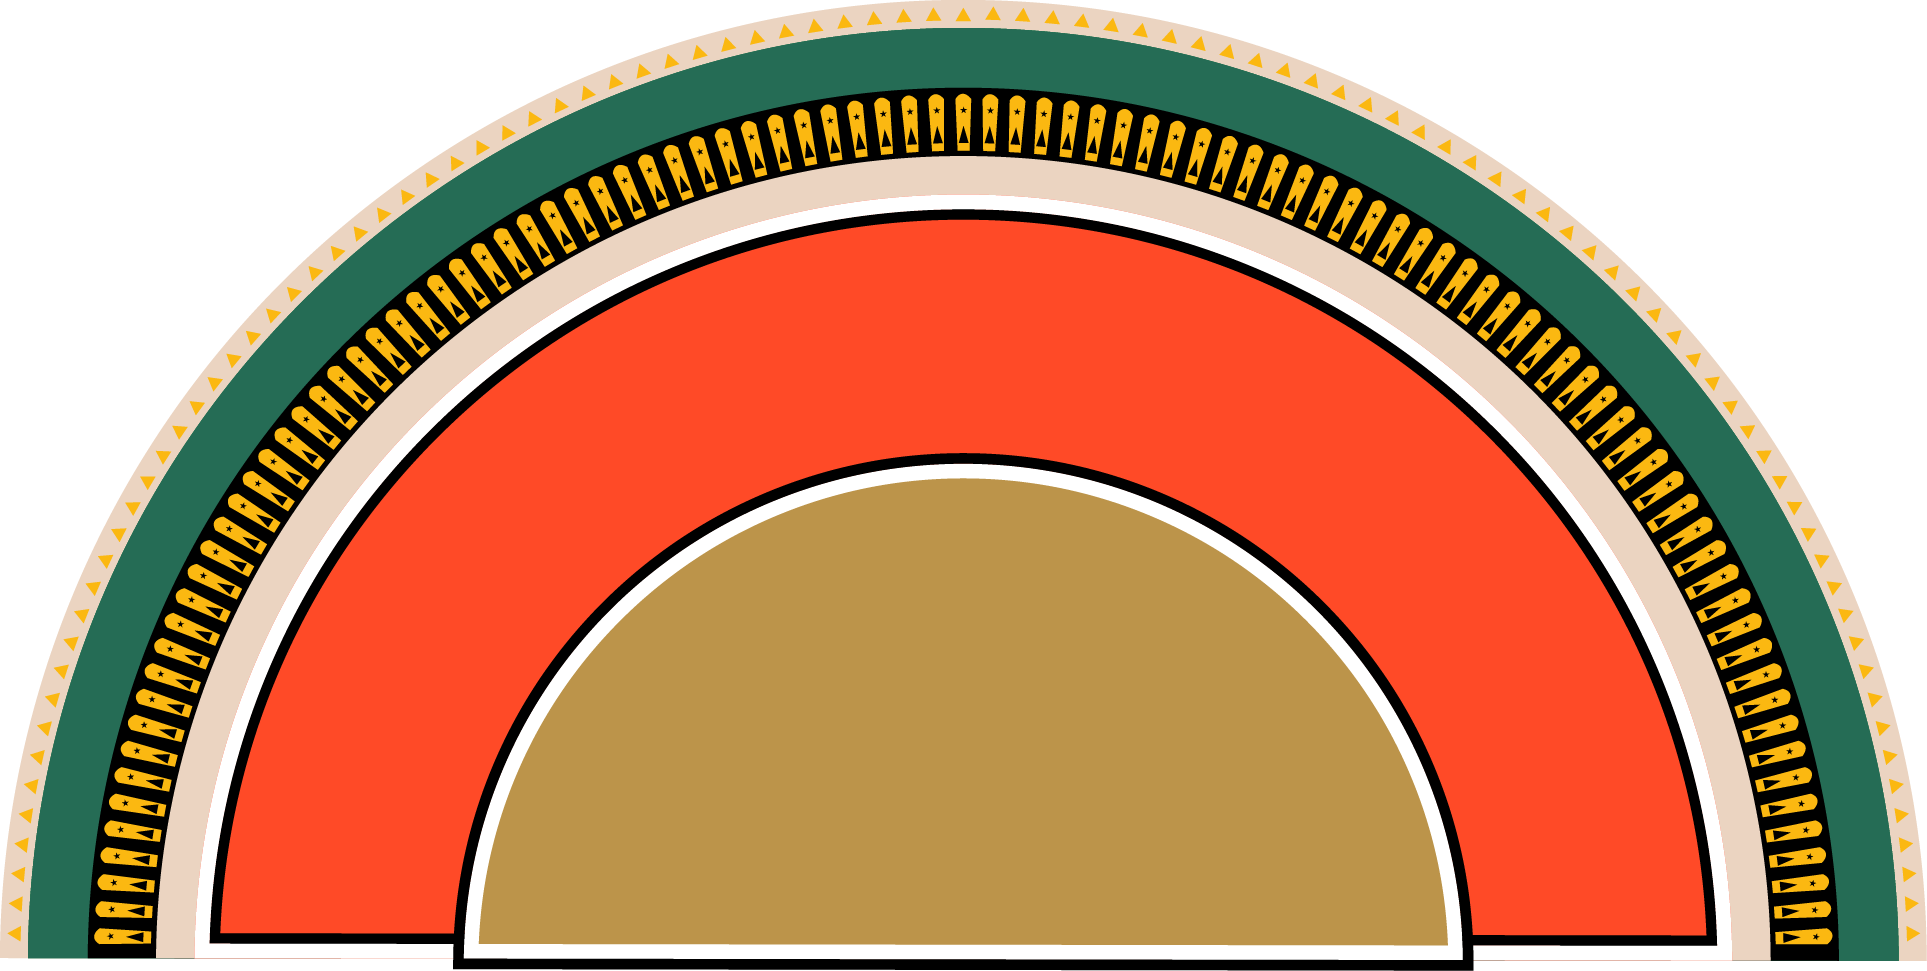 Abstract Semicircle Design